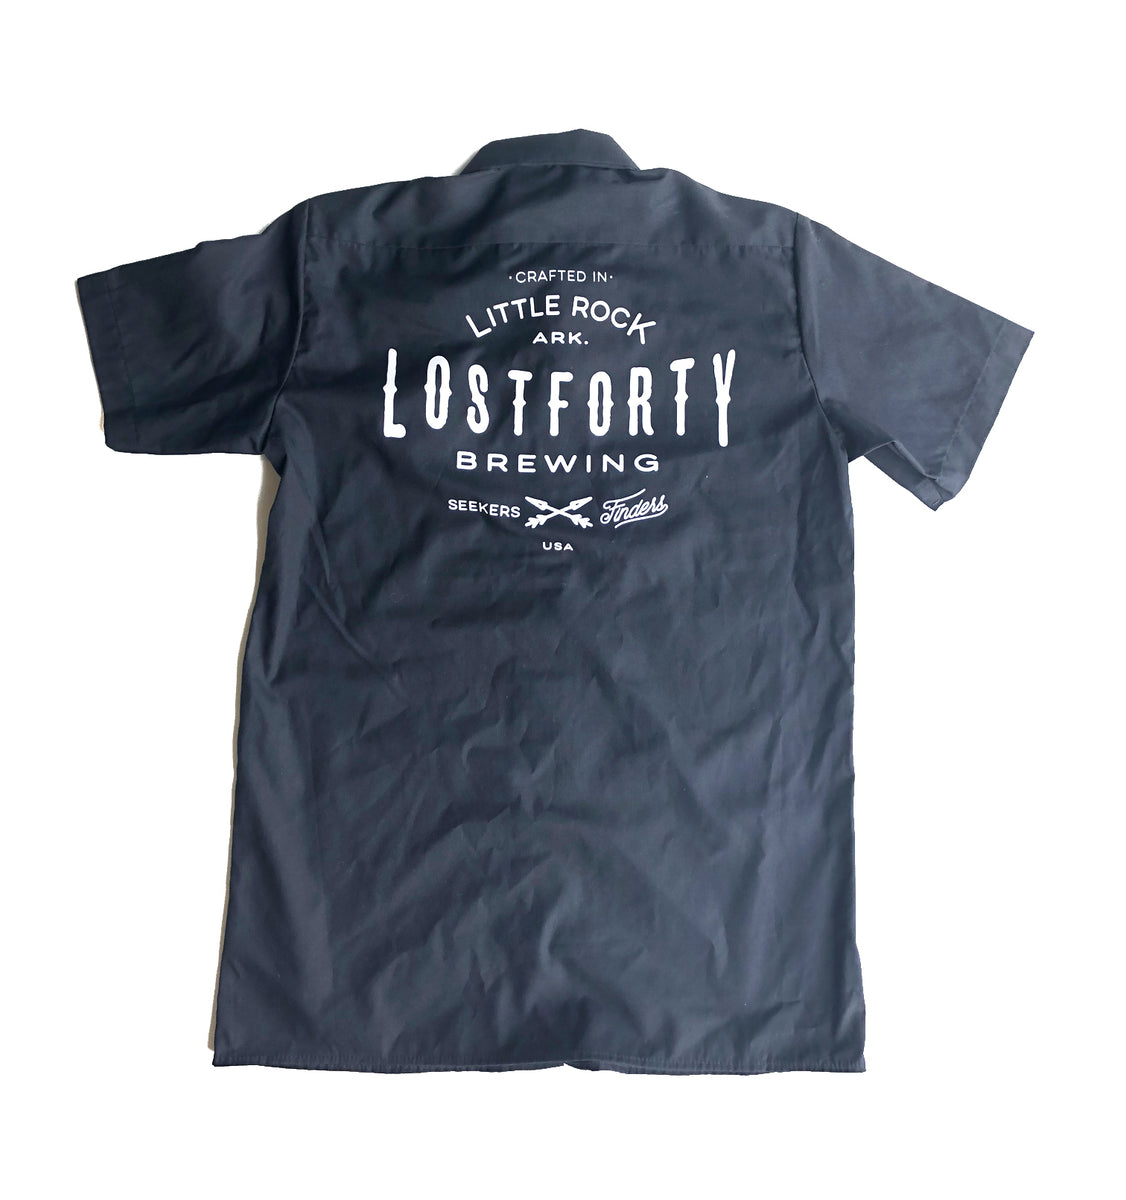 Brewhouse Work Shirt – Lost Forty Brewing